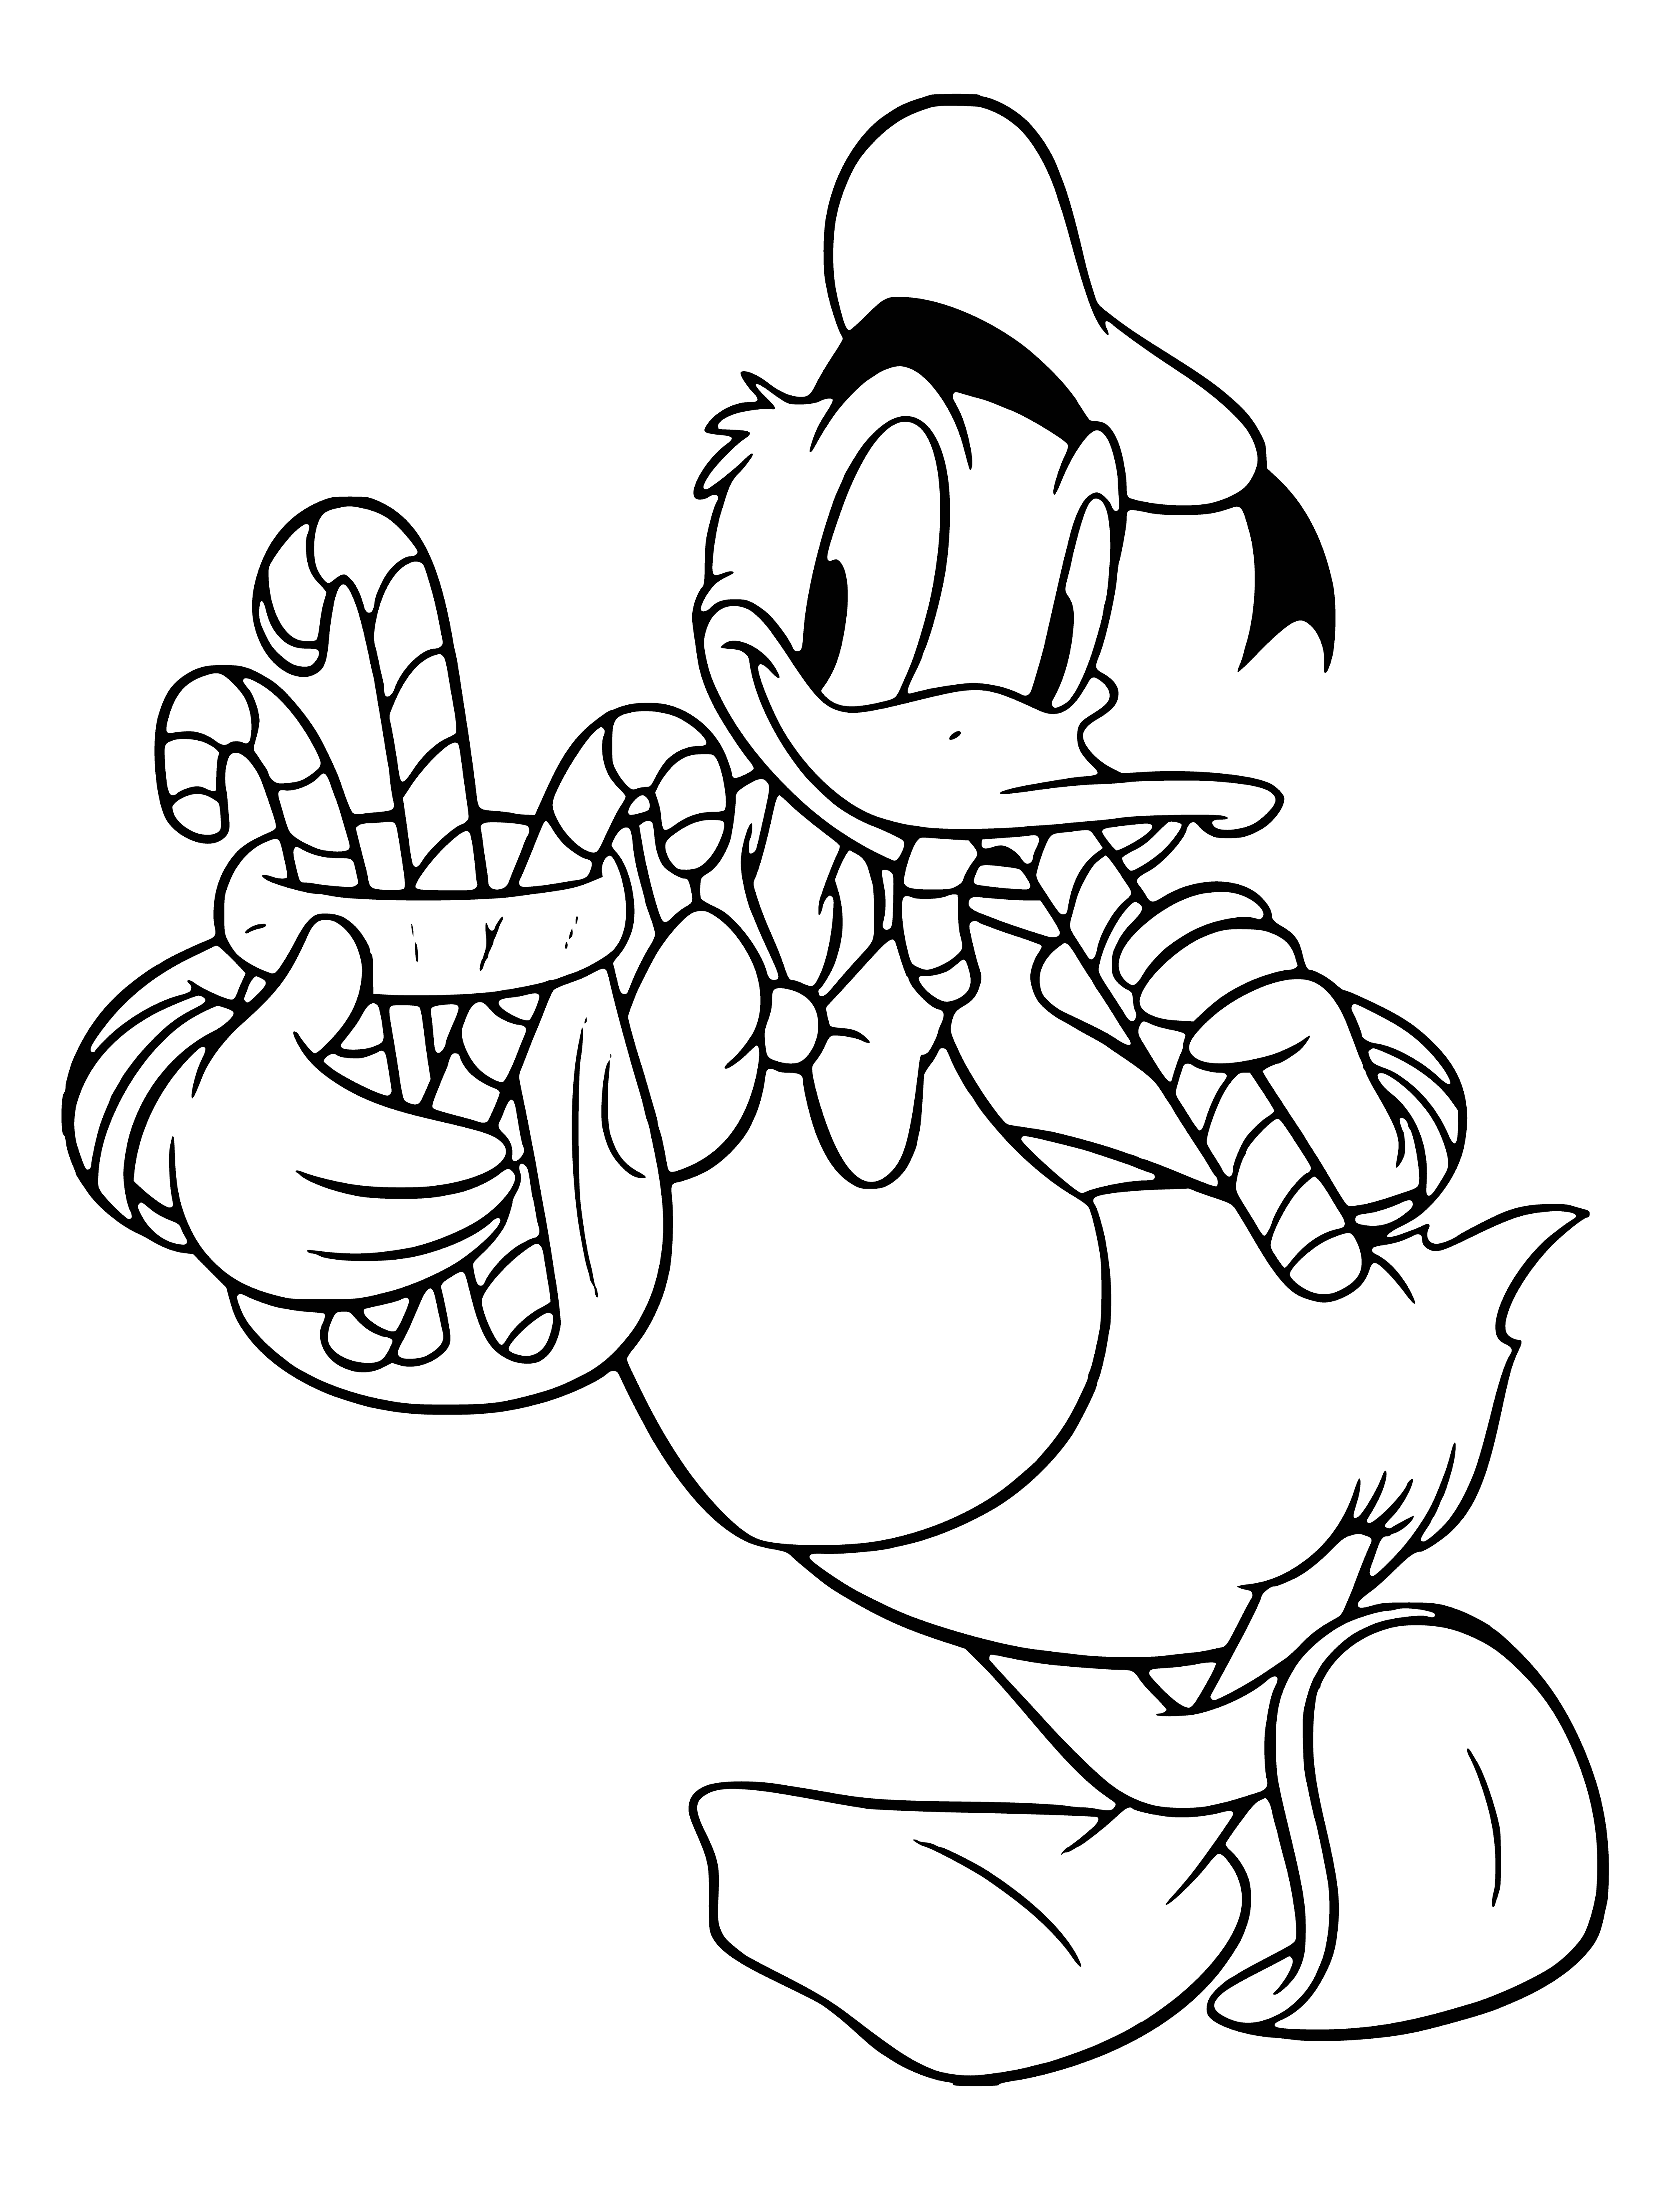 coloring page: Donald Duck is celebrating the New Year with fireworks, looking forward to an exciting 2021!